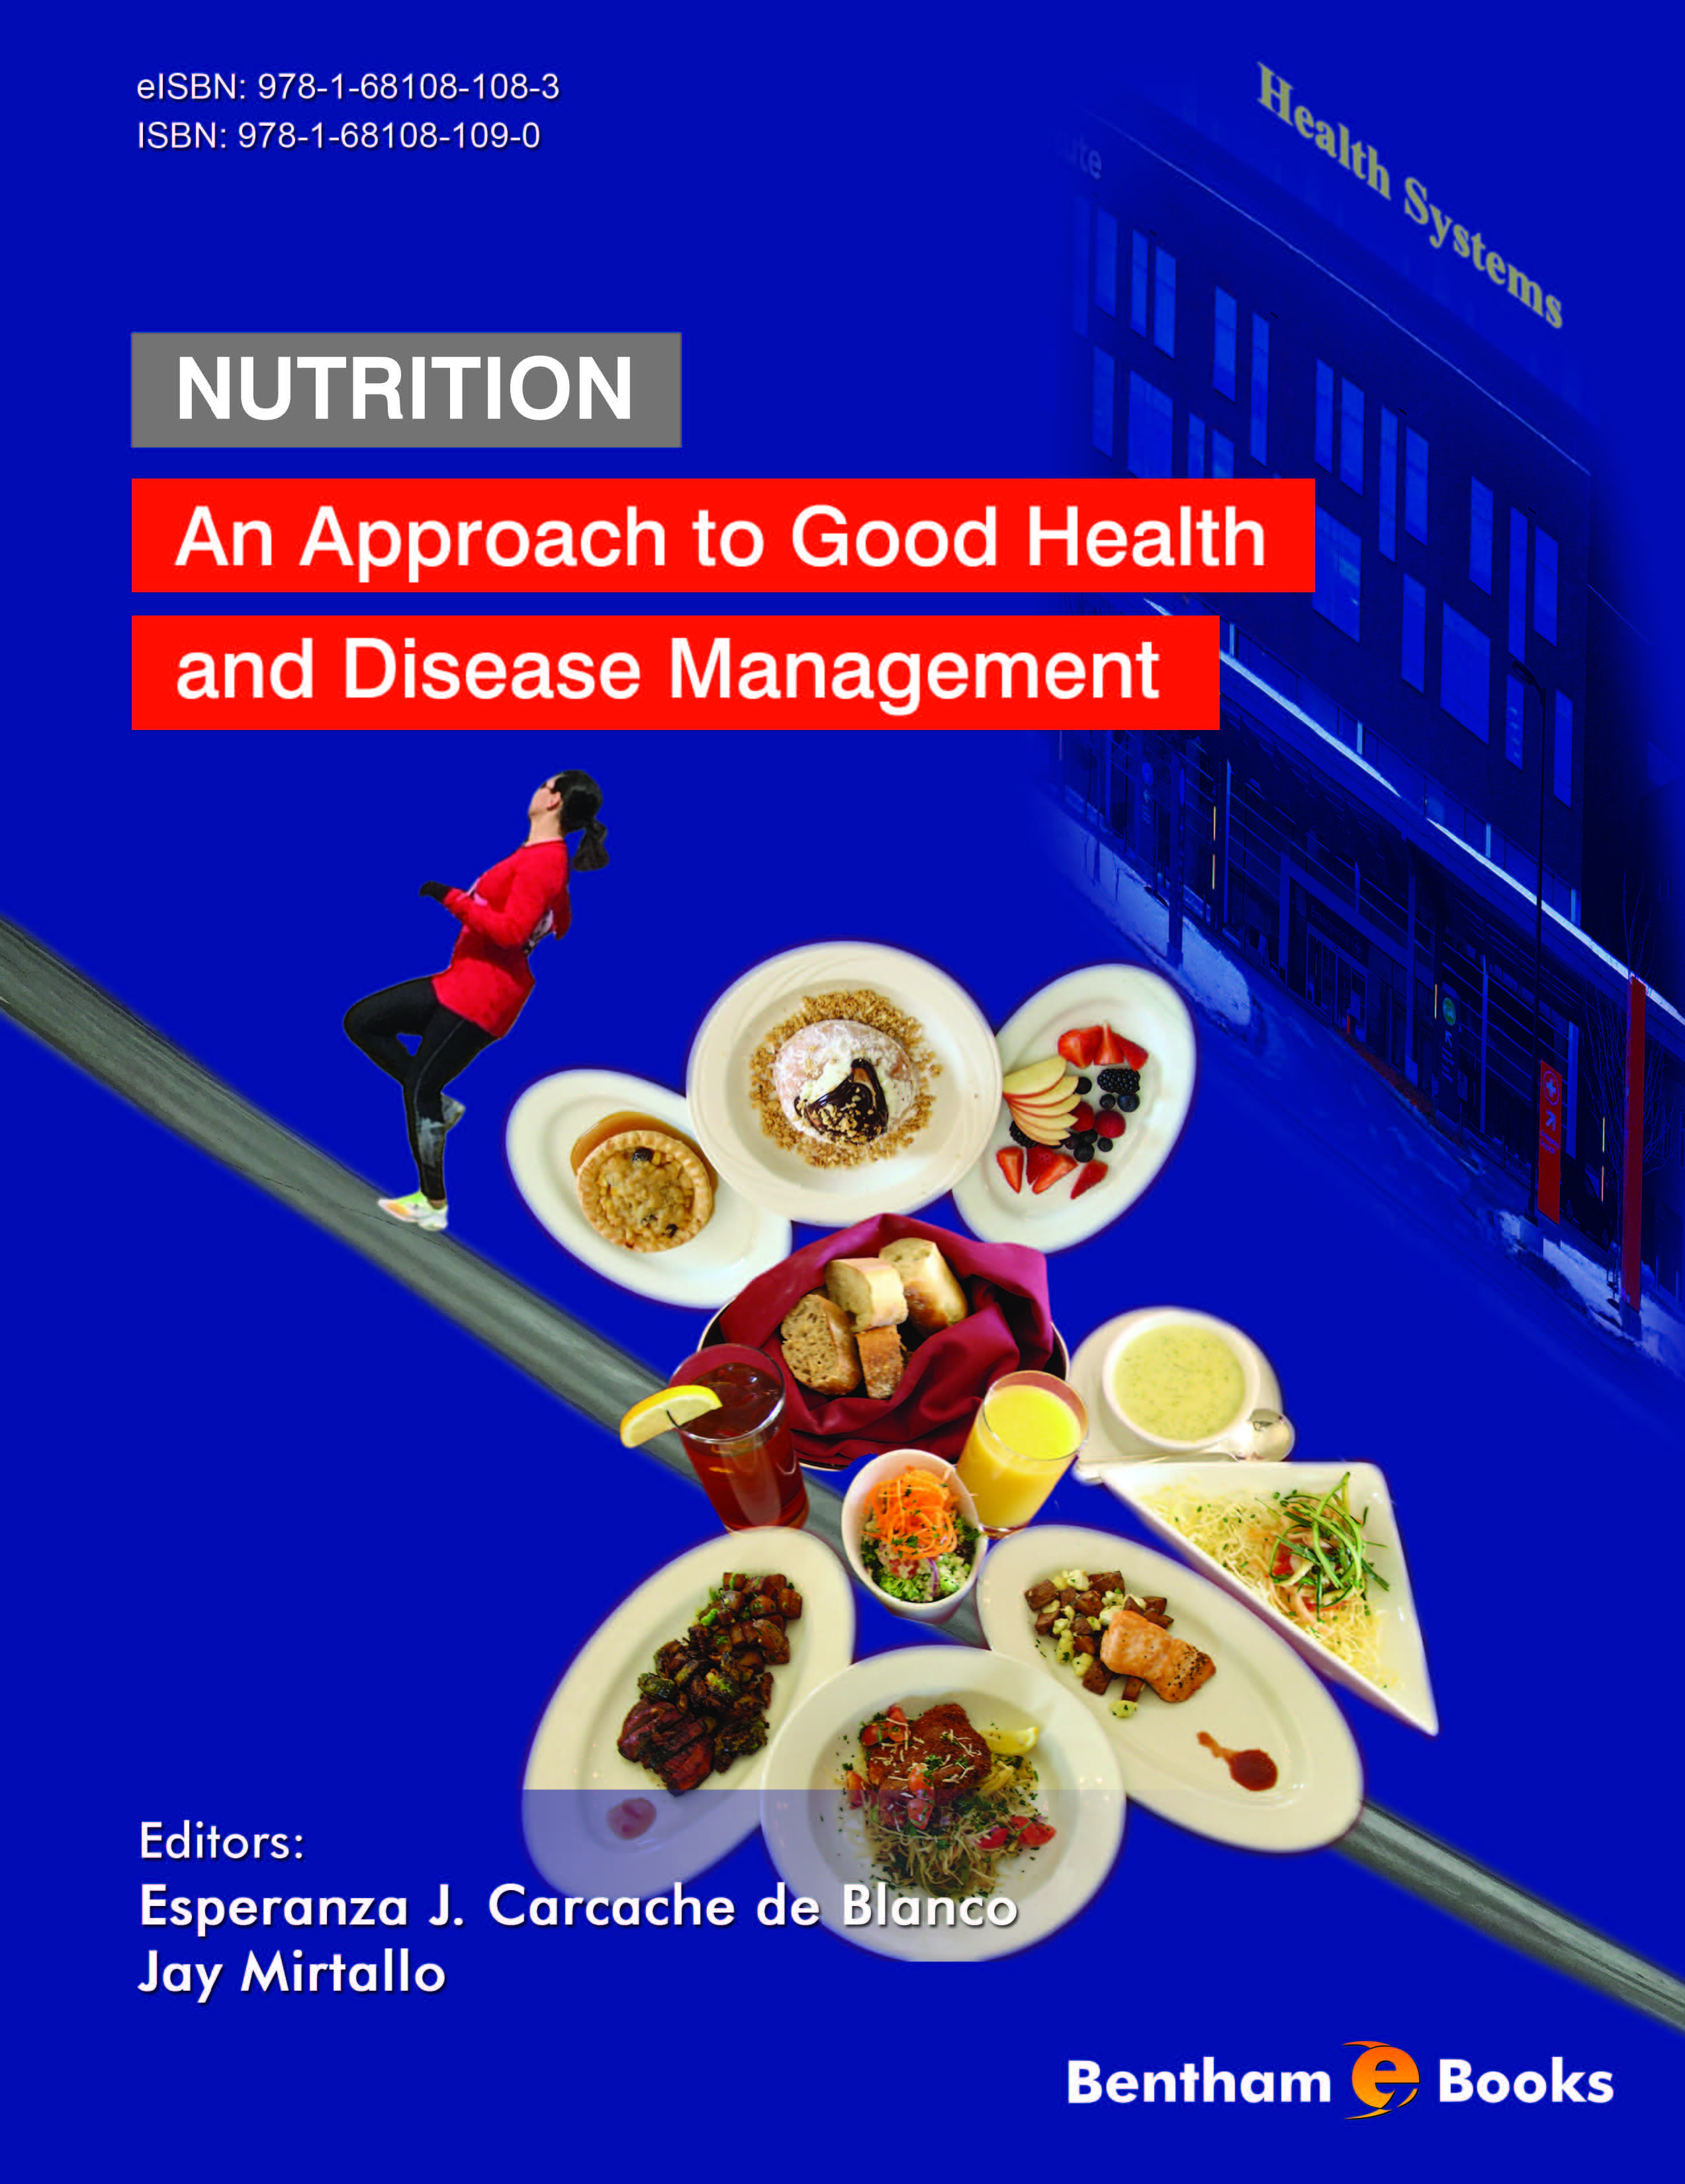 Nutrition: An Approach to Good Health and Disease Management